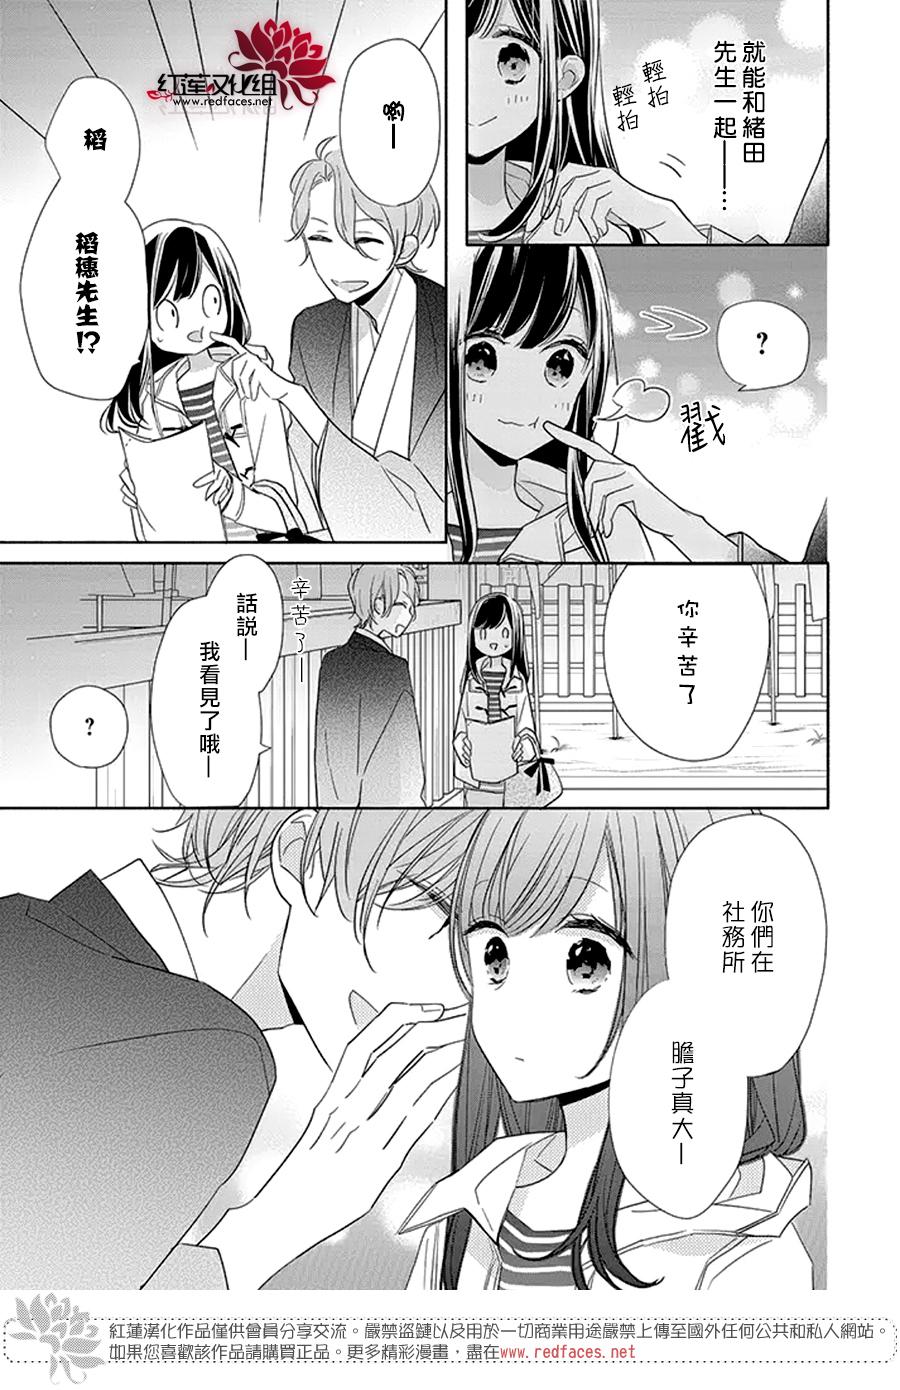 If given a second chance - 23話 - 1